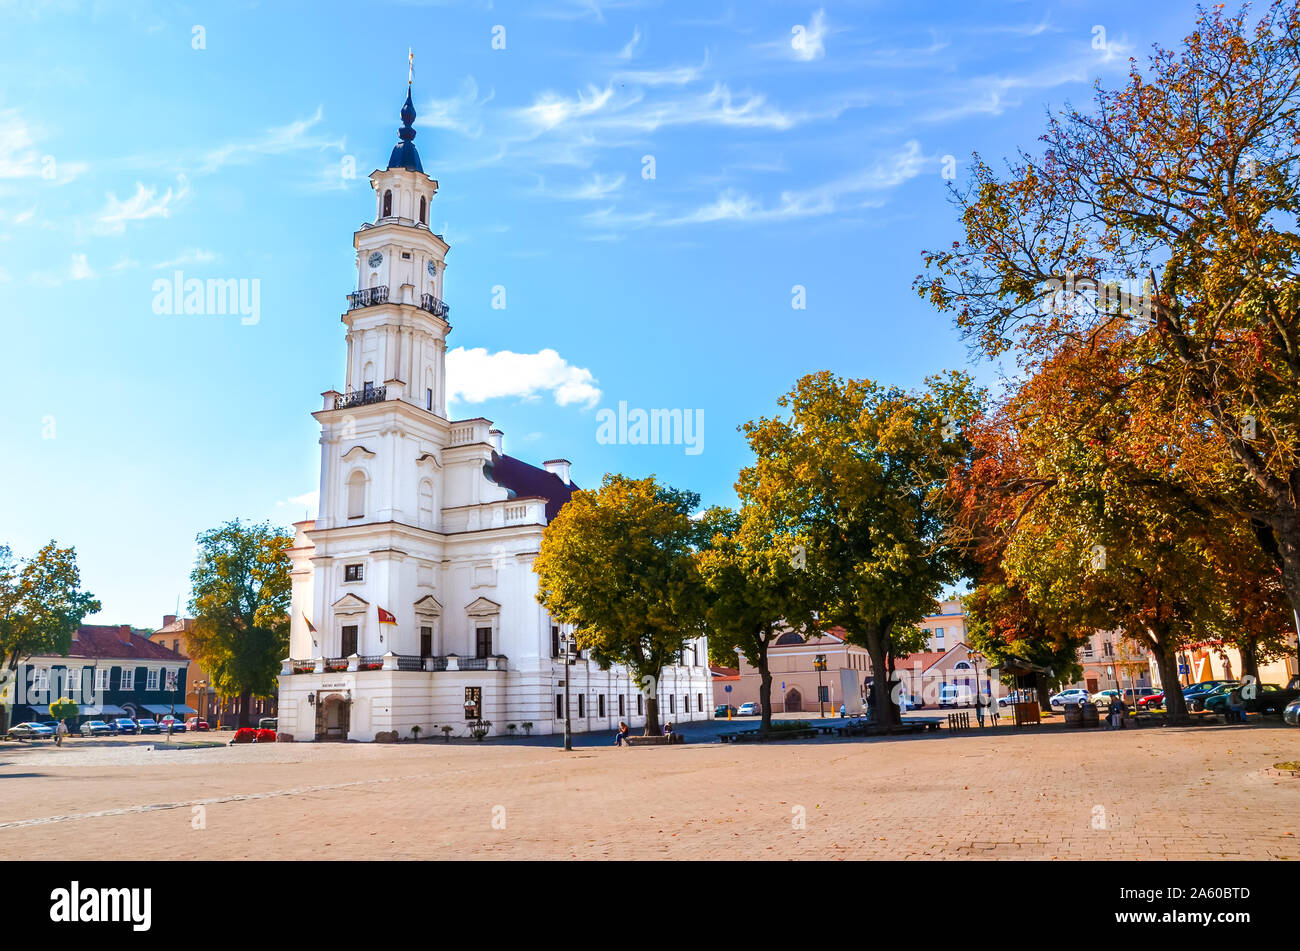 Town Hall on and adjacent Town Hall Square in Kaunas, Lithuania photographed in the autumn season with fall leaves. Second largest Lithuanian city, Baltic states, Baltics. Stock Photo